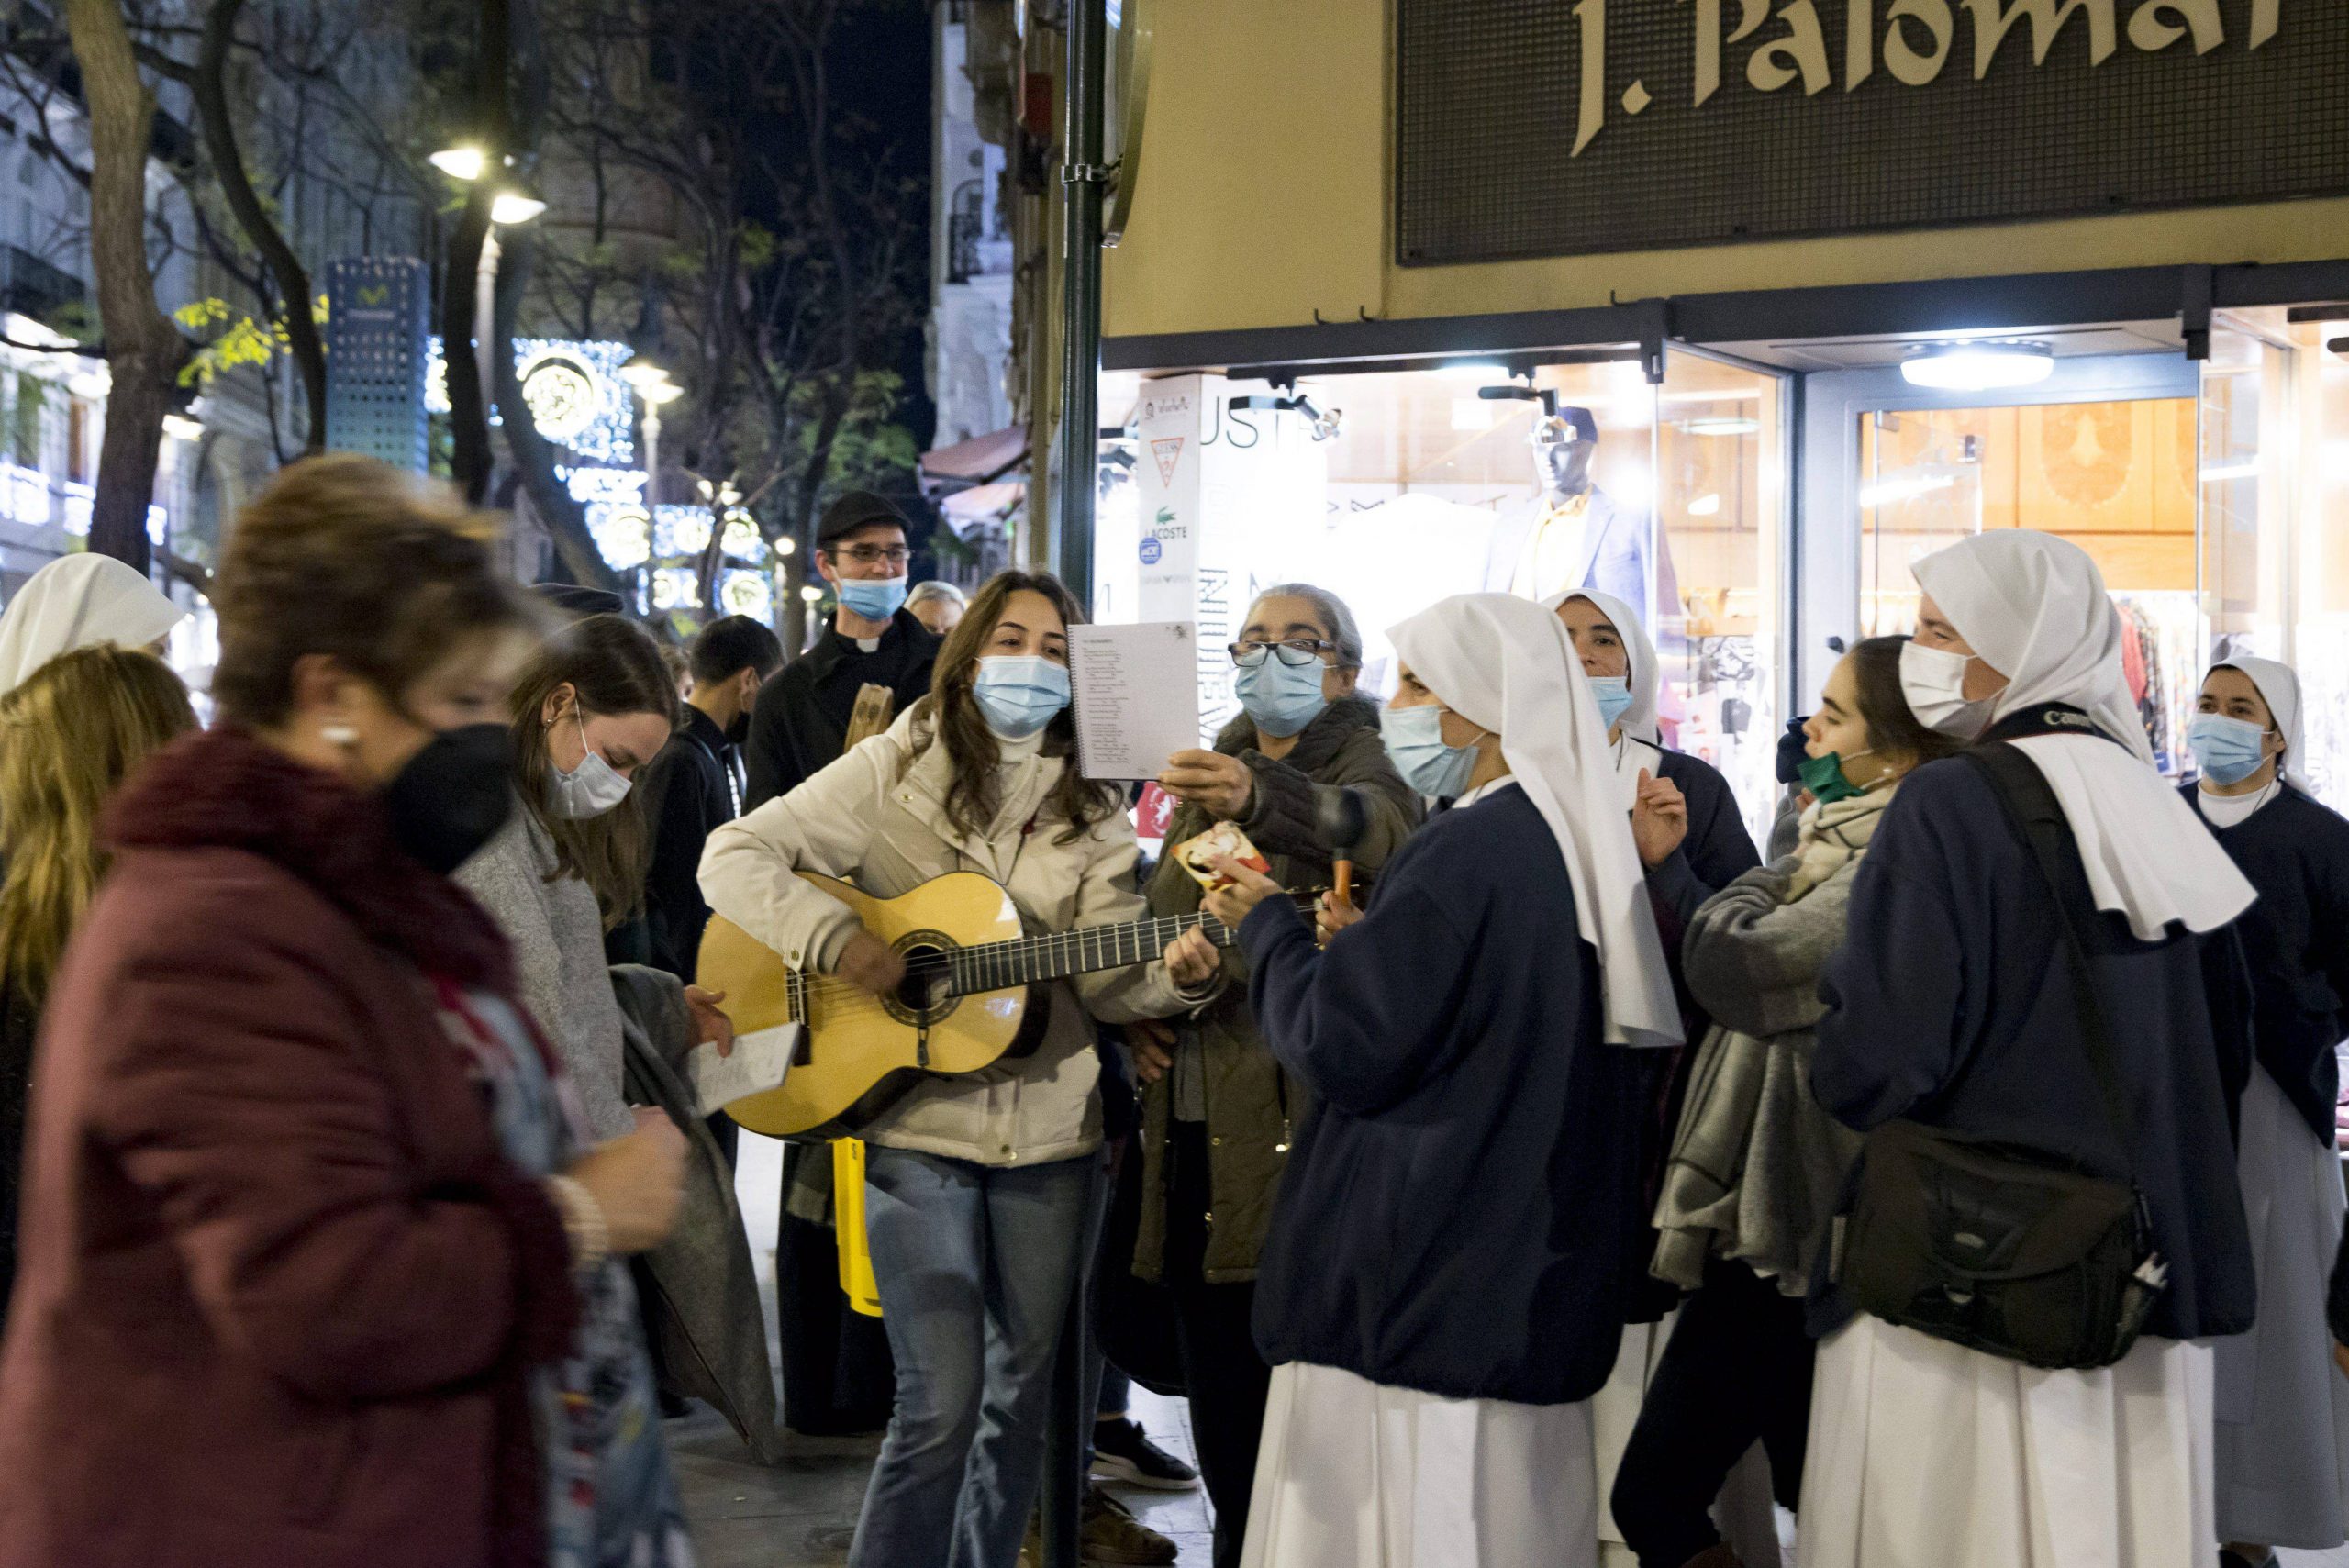 A group of nuns singing carols in Valencia over Christmas